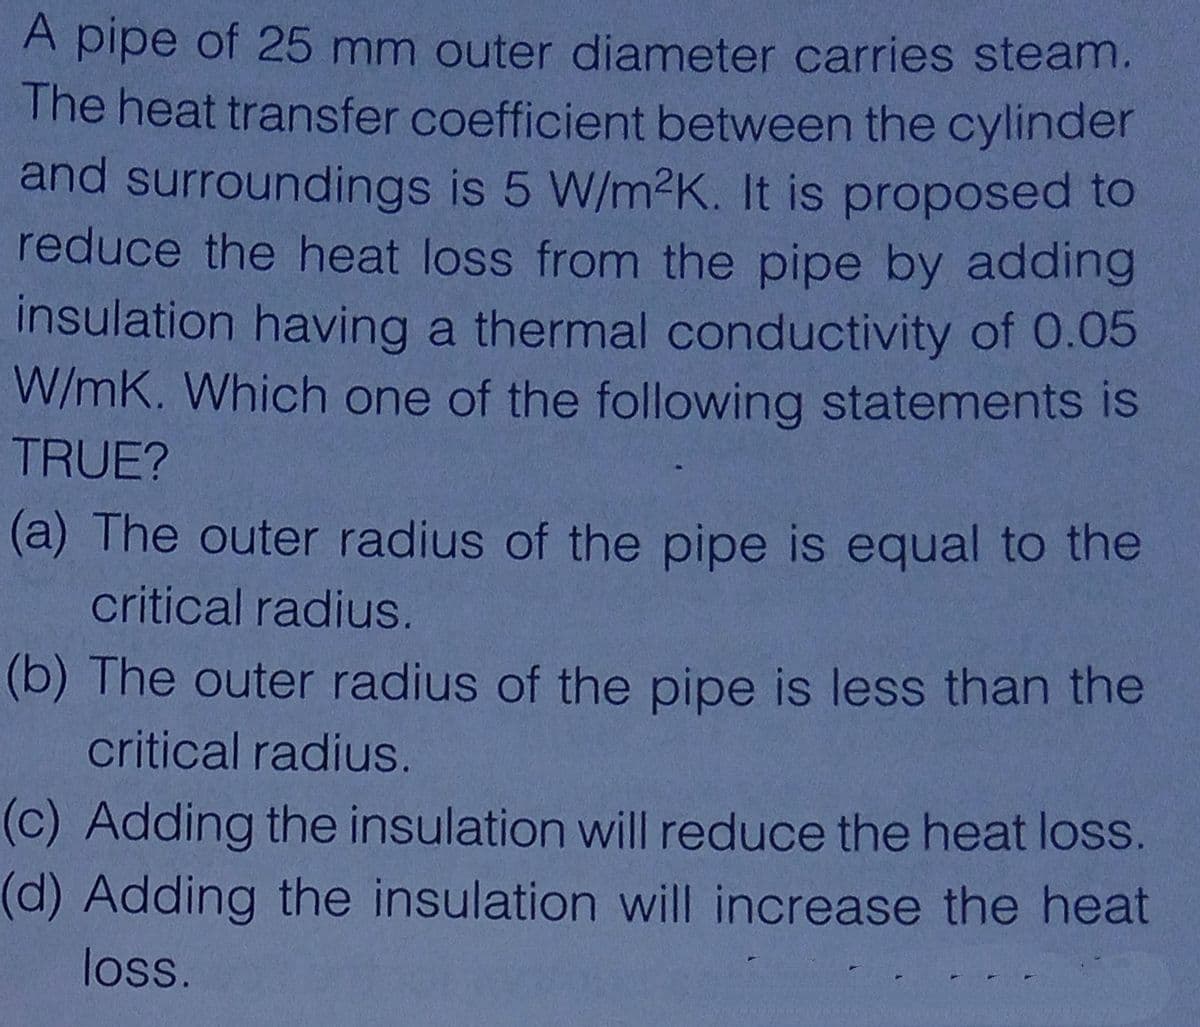 A pipe of 25 mm outer diameter carries steam.
The heat transfer coefficient between the cylinder
and surroundings is 5 W/m2K. It is proposed to
reduce the heat loss from the pipe by adding
insulation having a thermal conductivity of 0.05
W/mK. Which one of the following statements is
TRUE?
(a) The outer radius of the pipe is equal to the
critical radius.
(b) The outer radius of the pipe is less than the
critical radius.
(c) Adding the insulation will reduce the heat loss.
(d) Adding the insulation will increase the heat
loss.
